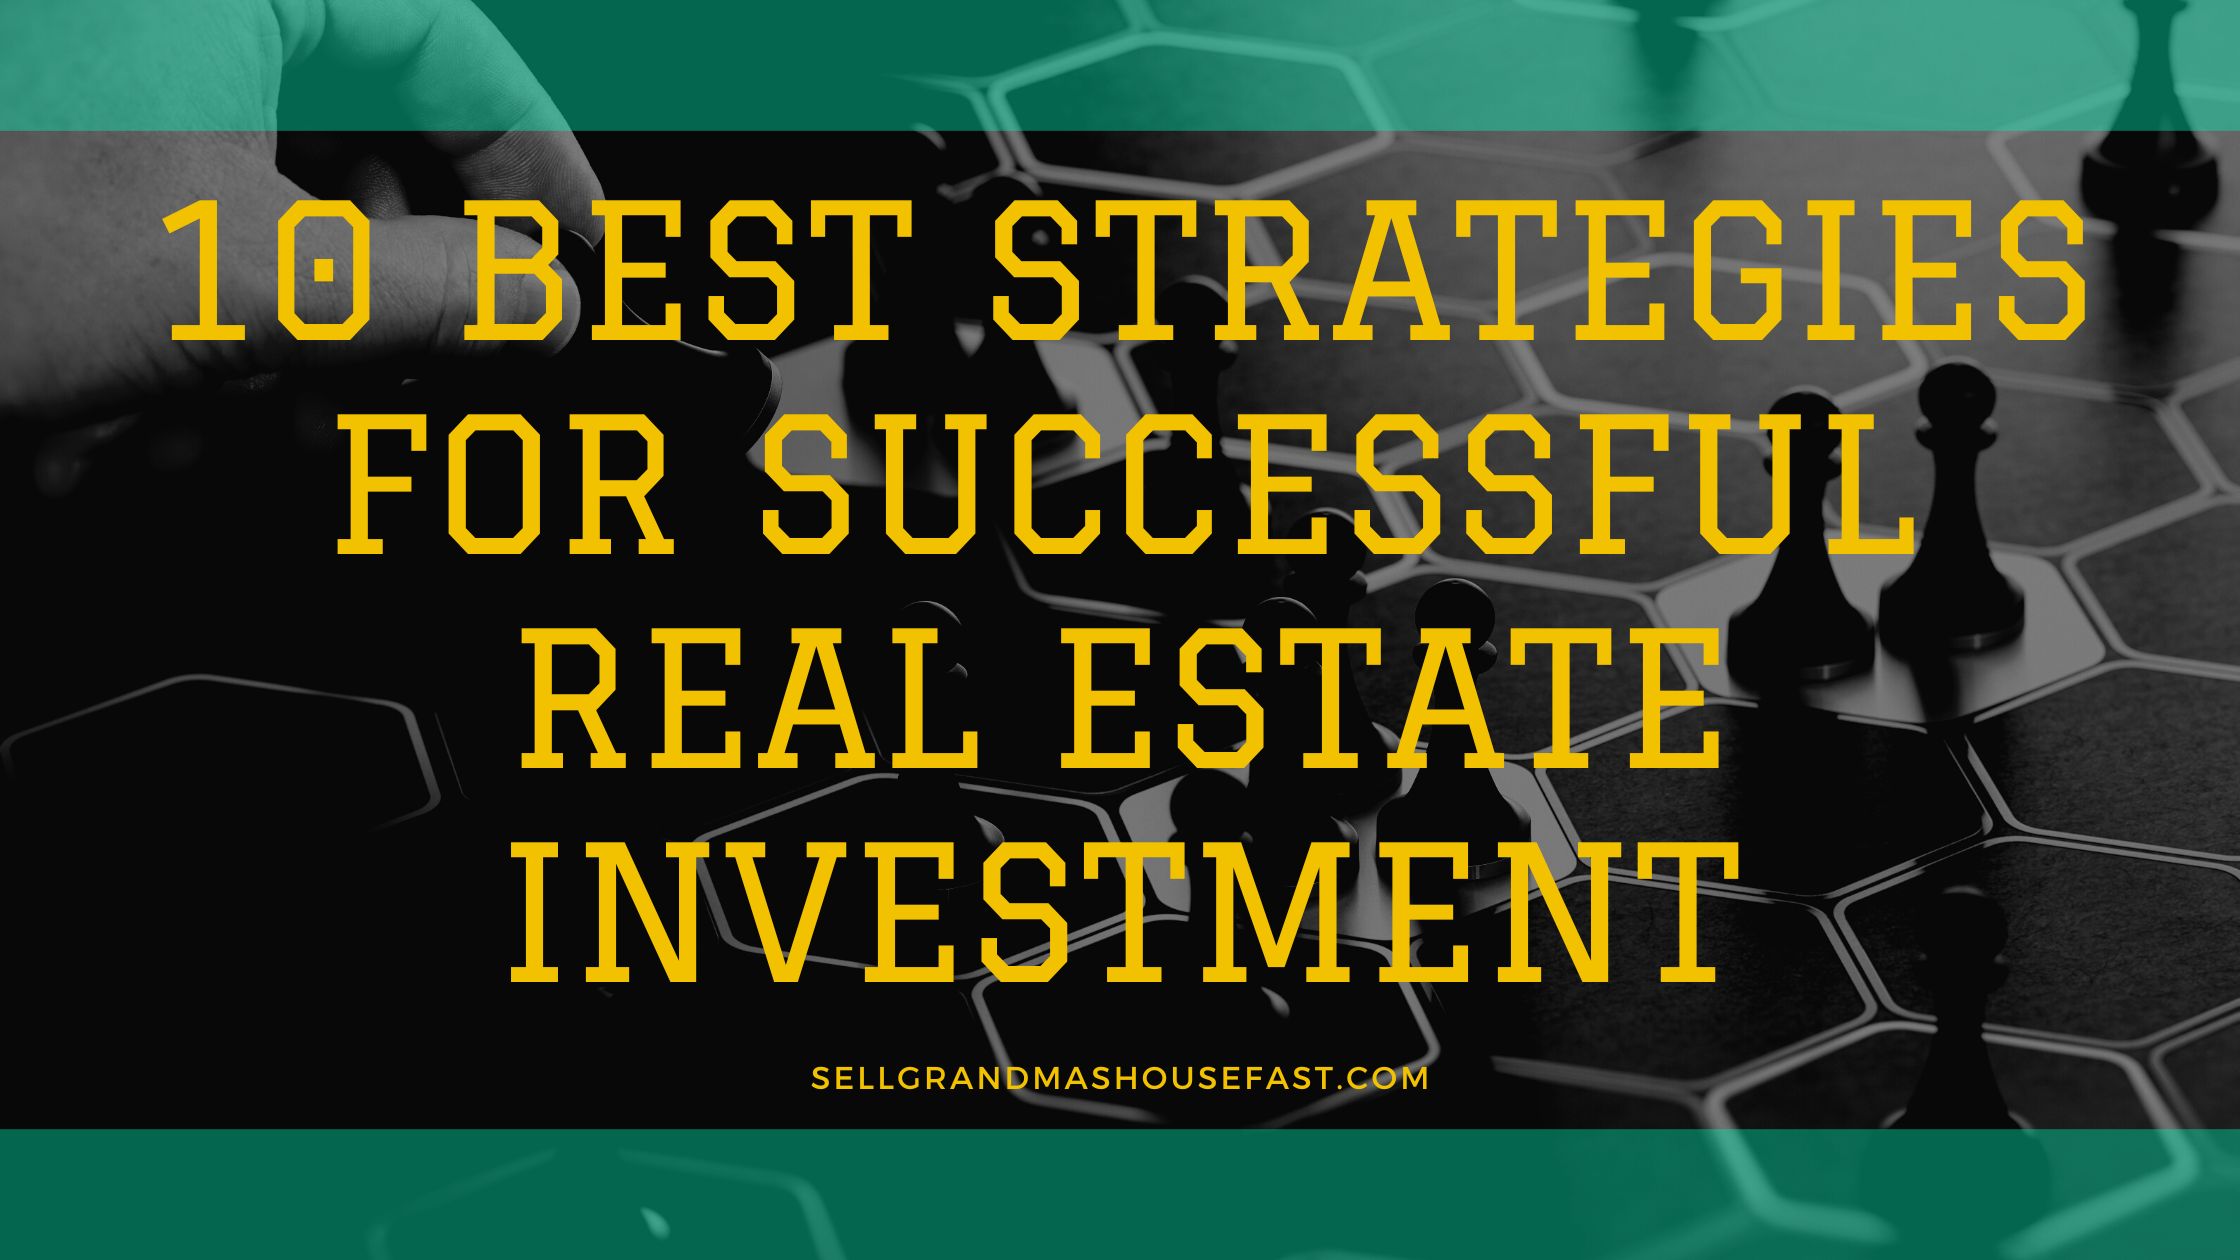 You are currently viewing 10 Best Strategies for Successful Real Estate Investment